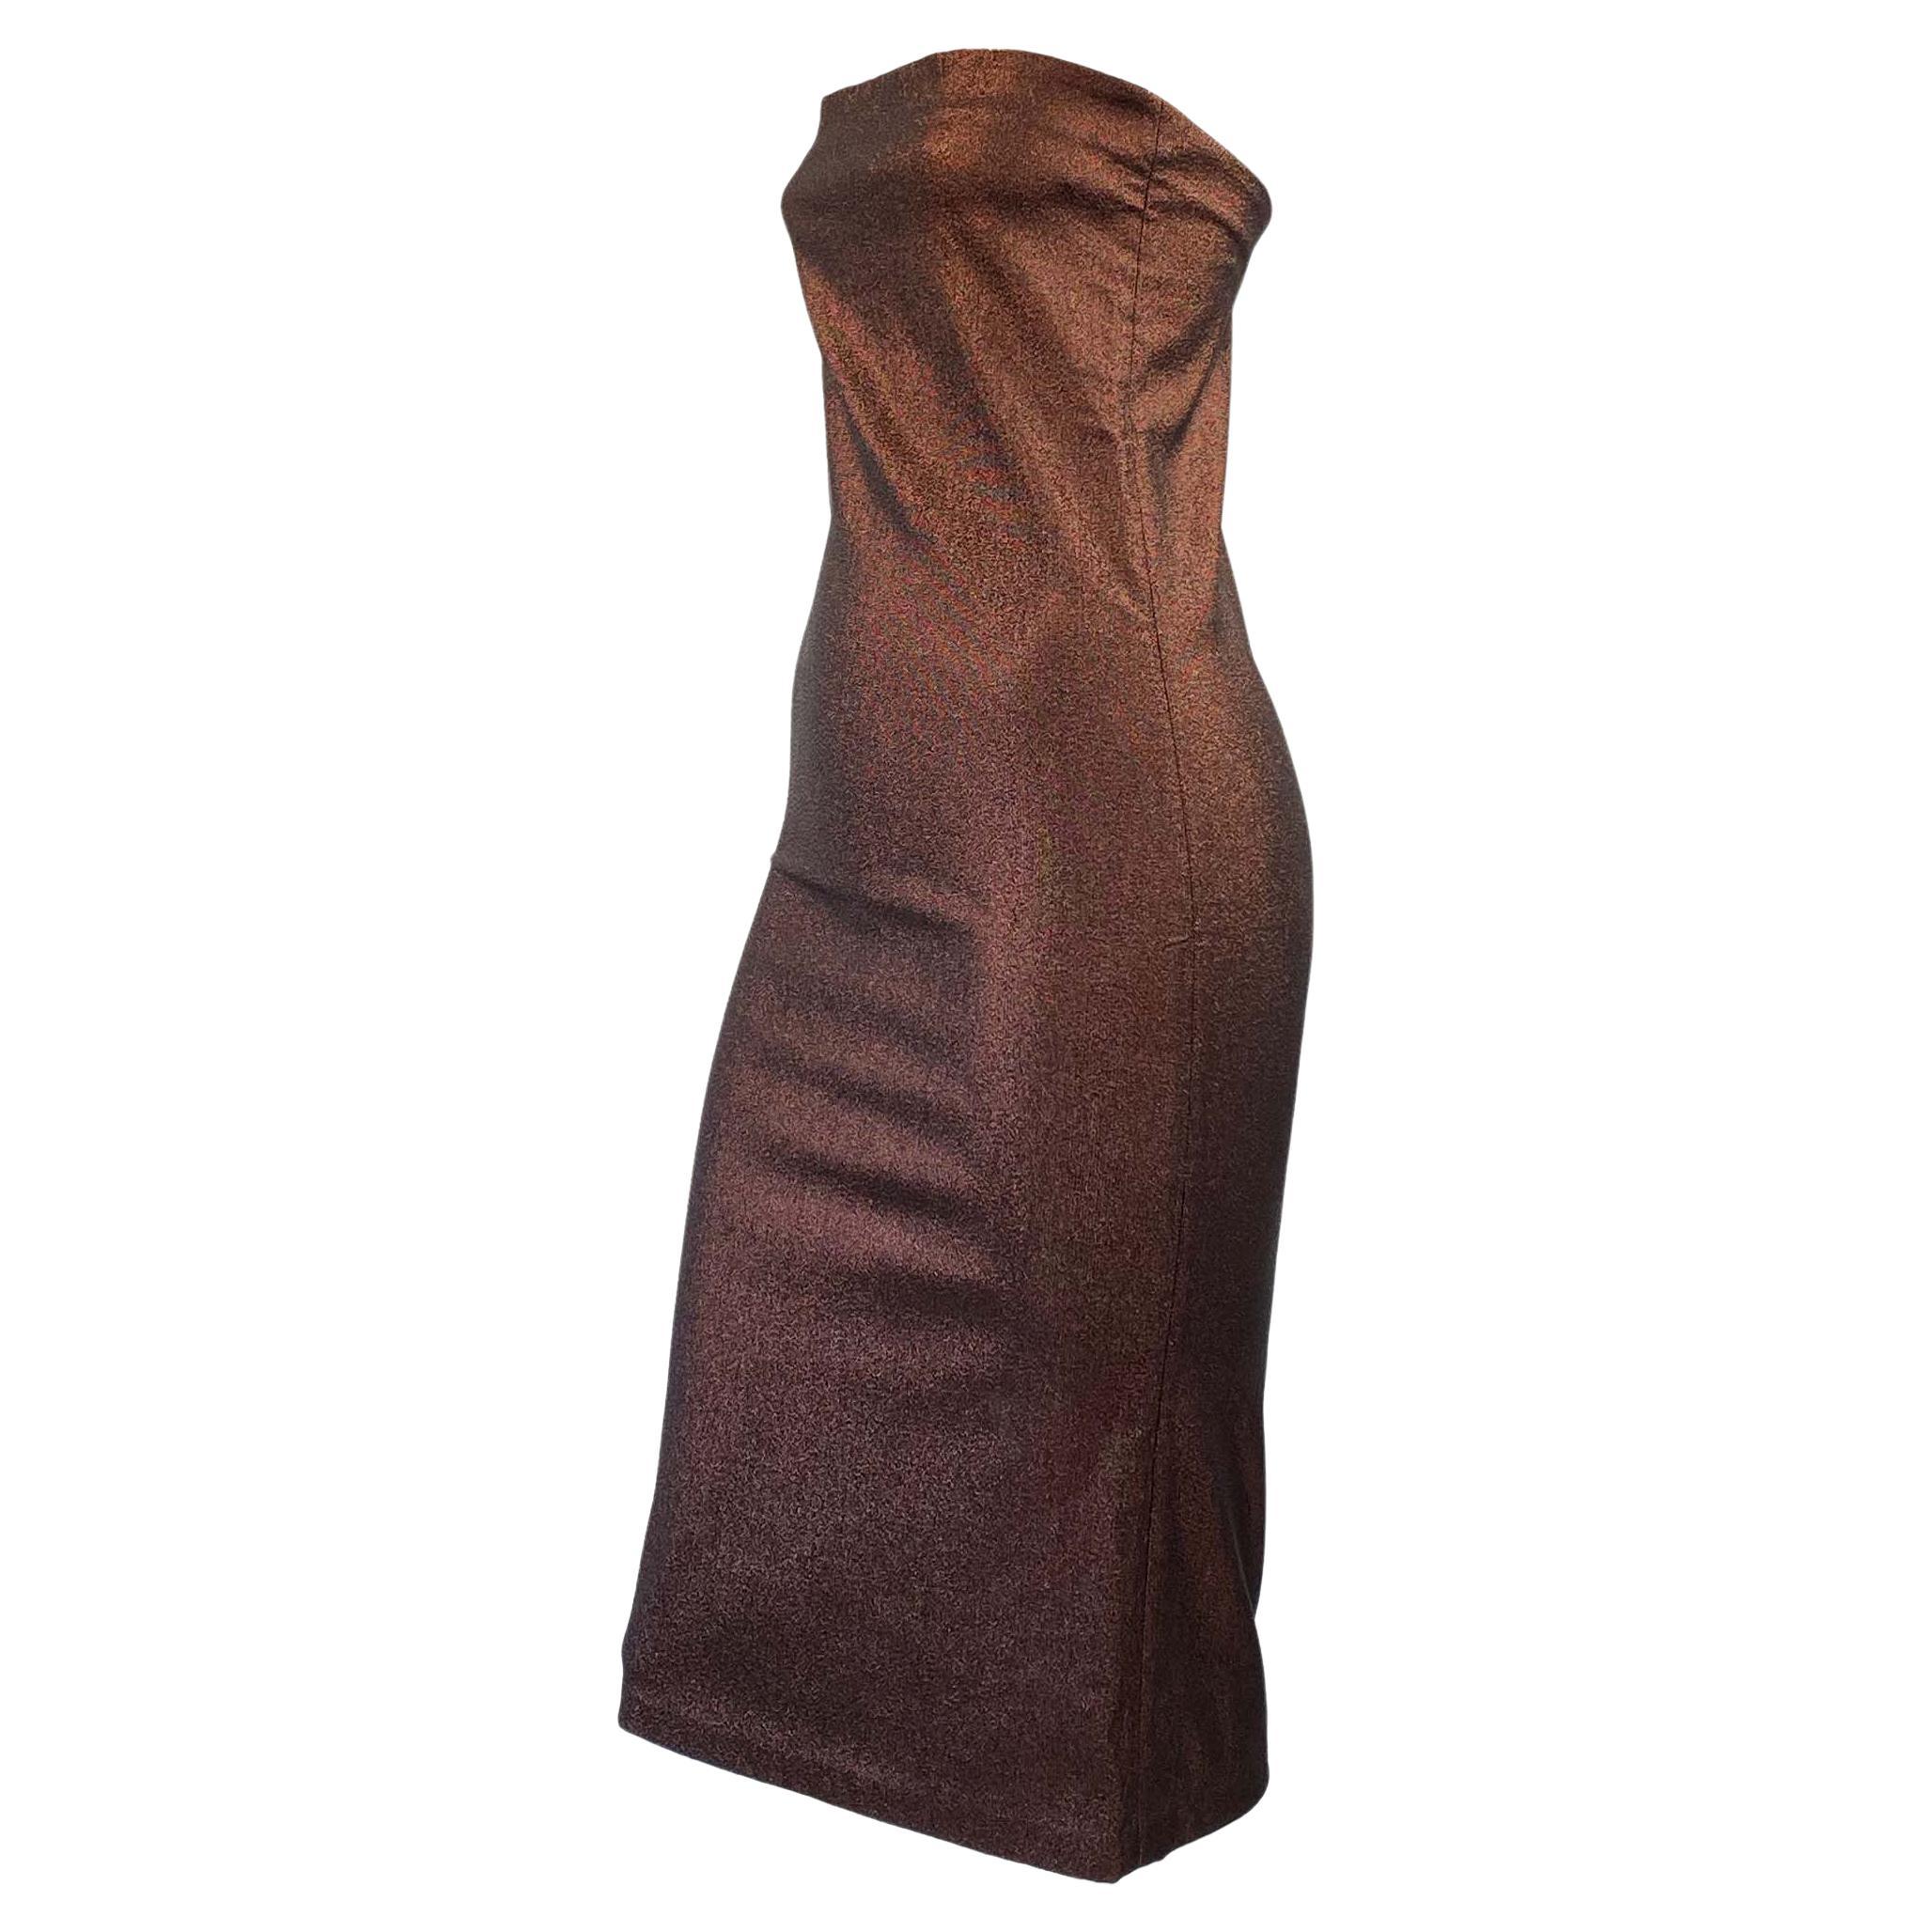 S/S 1997 Gucci by Tom Ford Brown Lurex Metallic Stretch Strapless Tube Dress For Sale